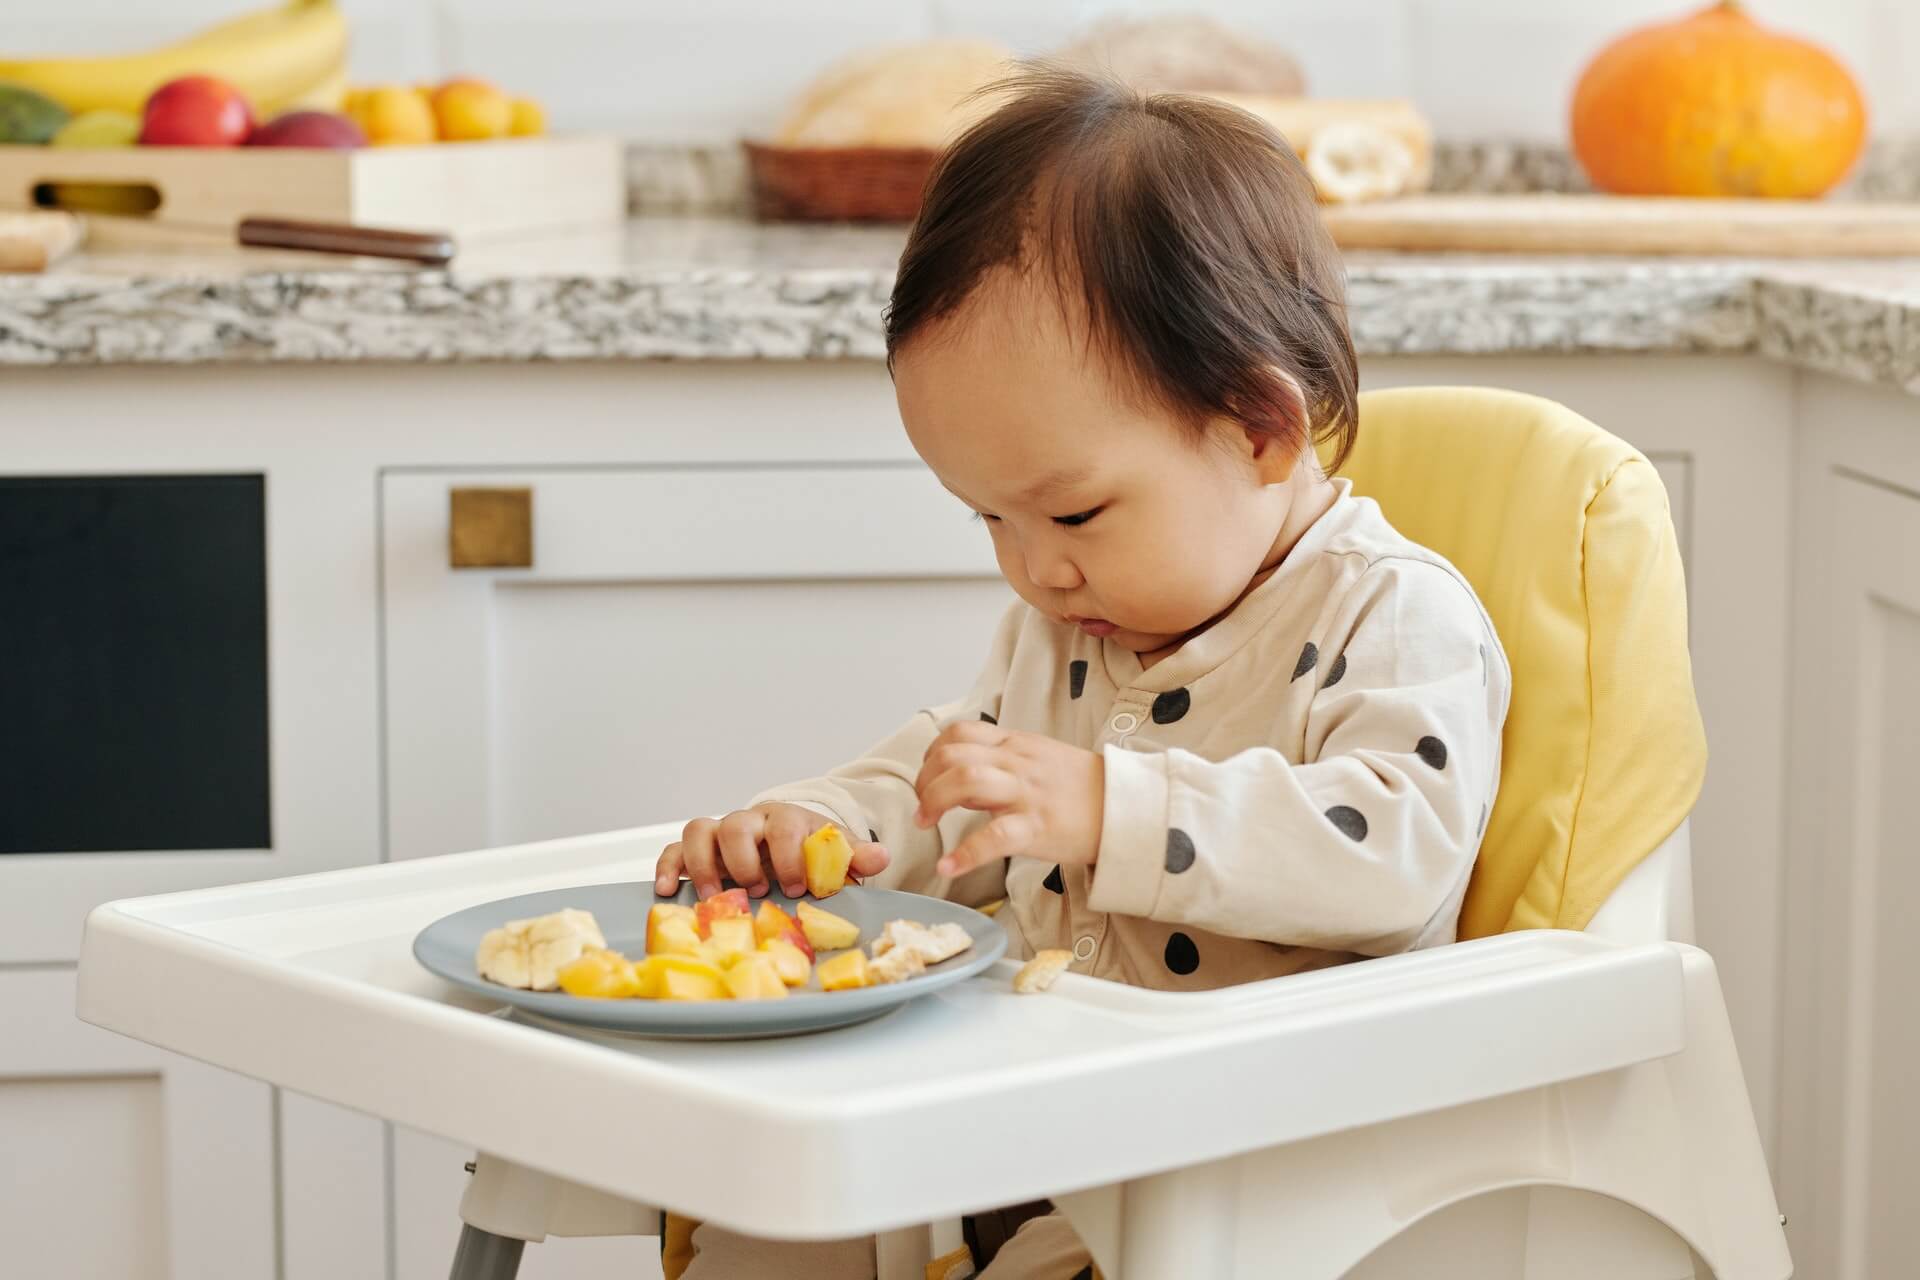 Studies say starting a baby with a “nordic diet” can prevent childhood obesity